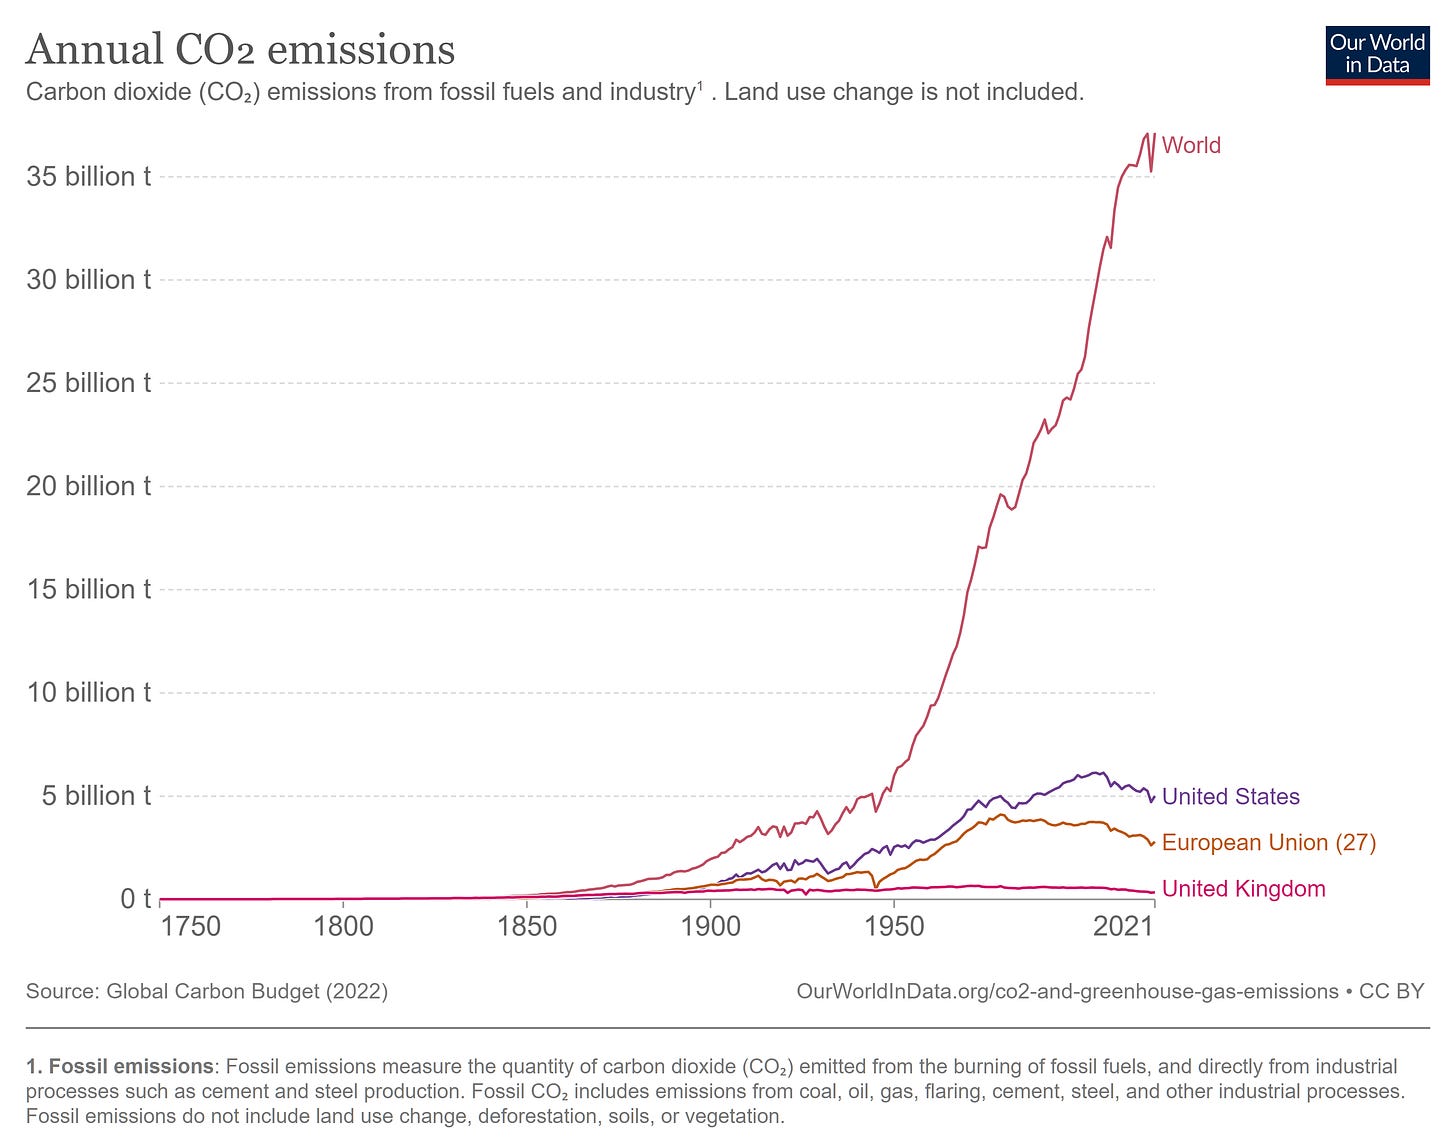 Annual CO2 Emissions by Country and Region (source Our World in Data)